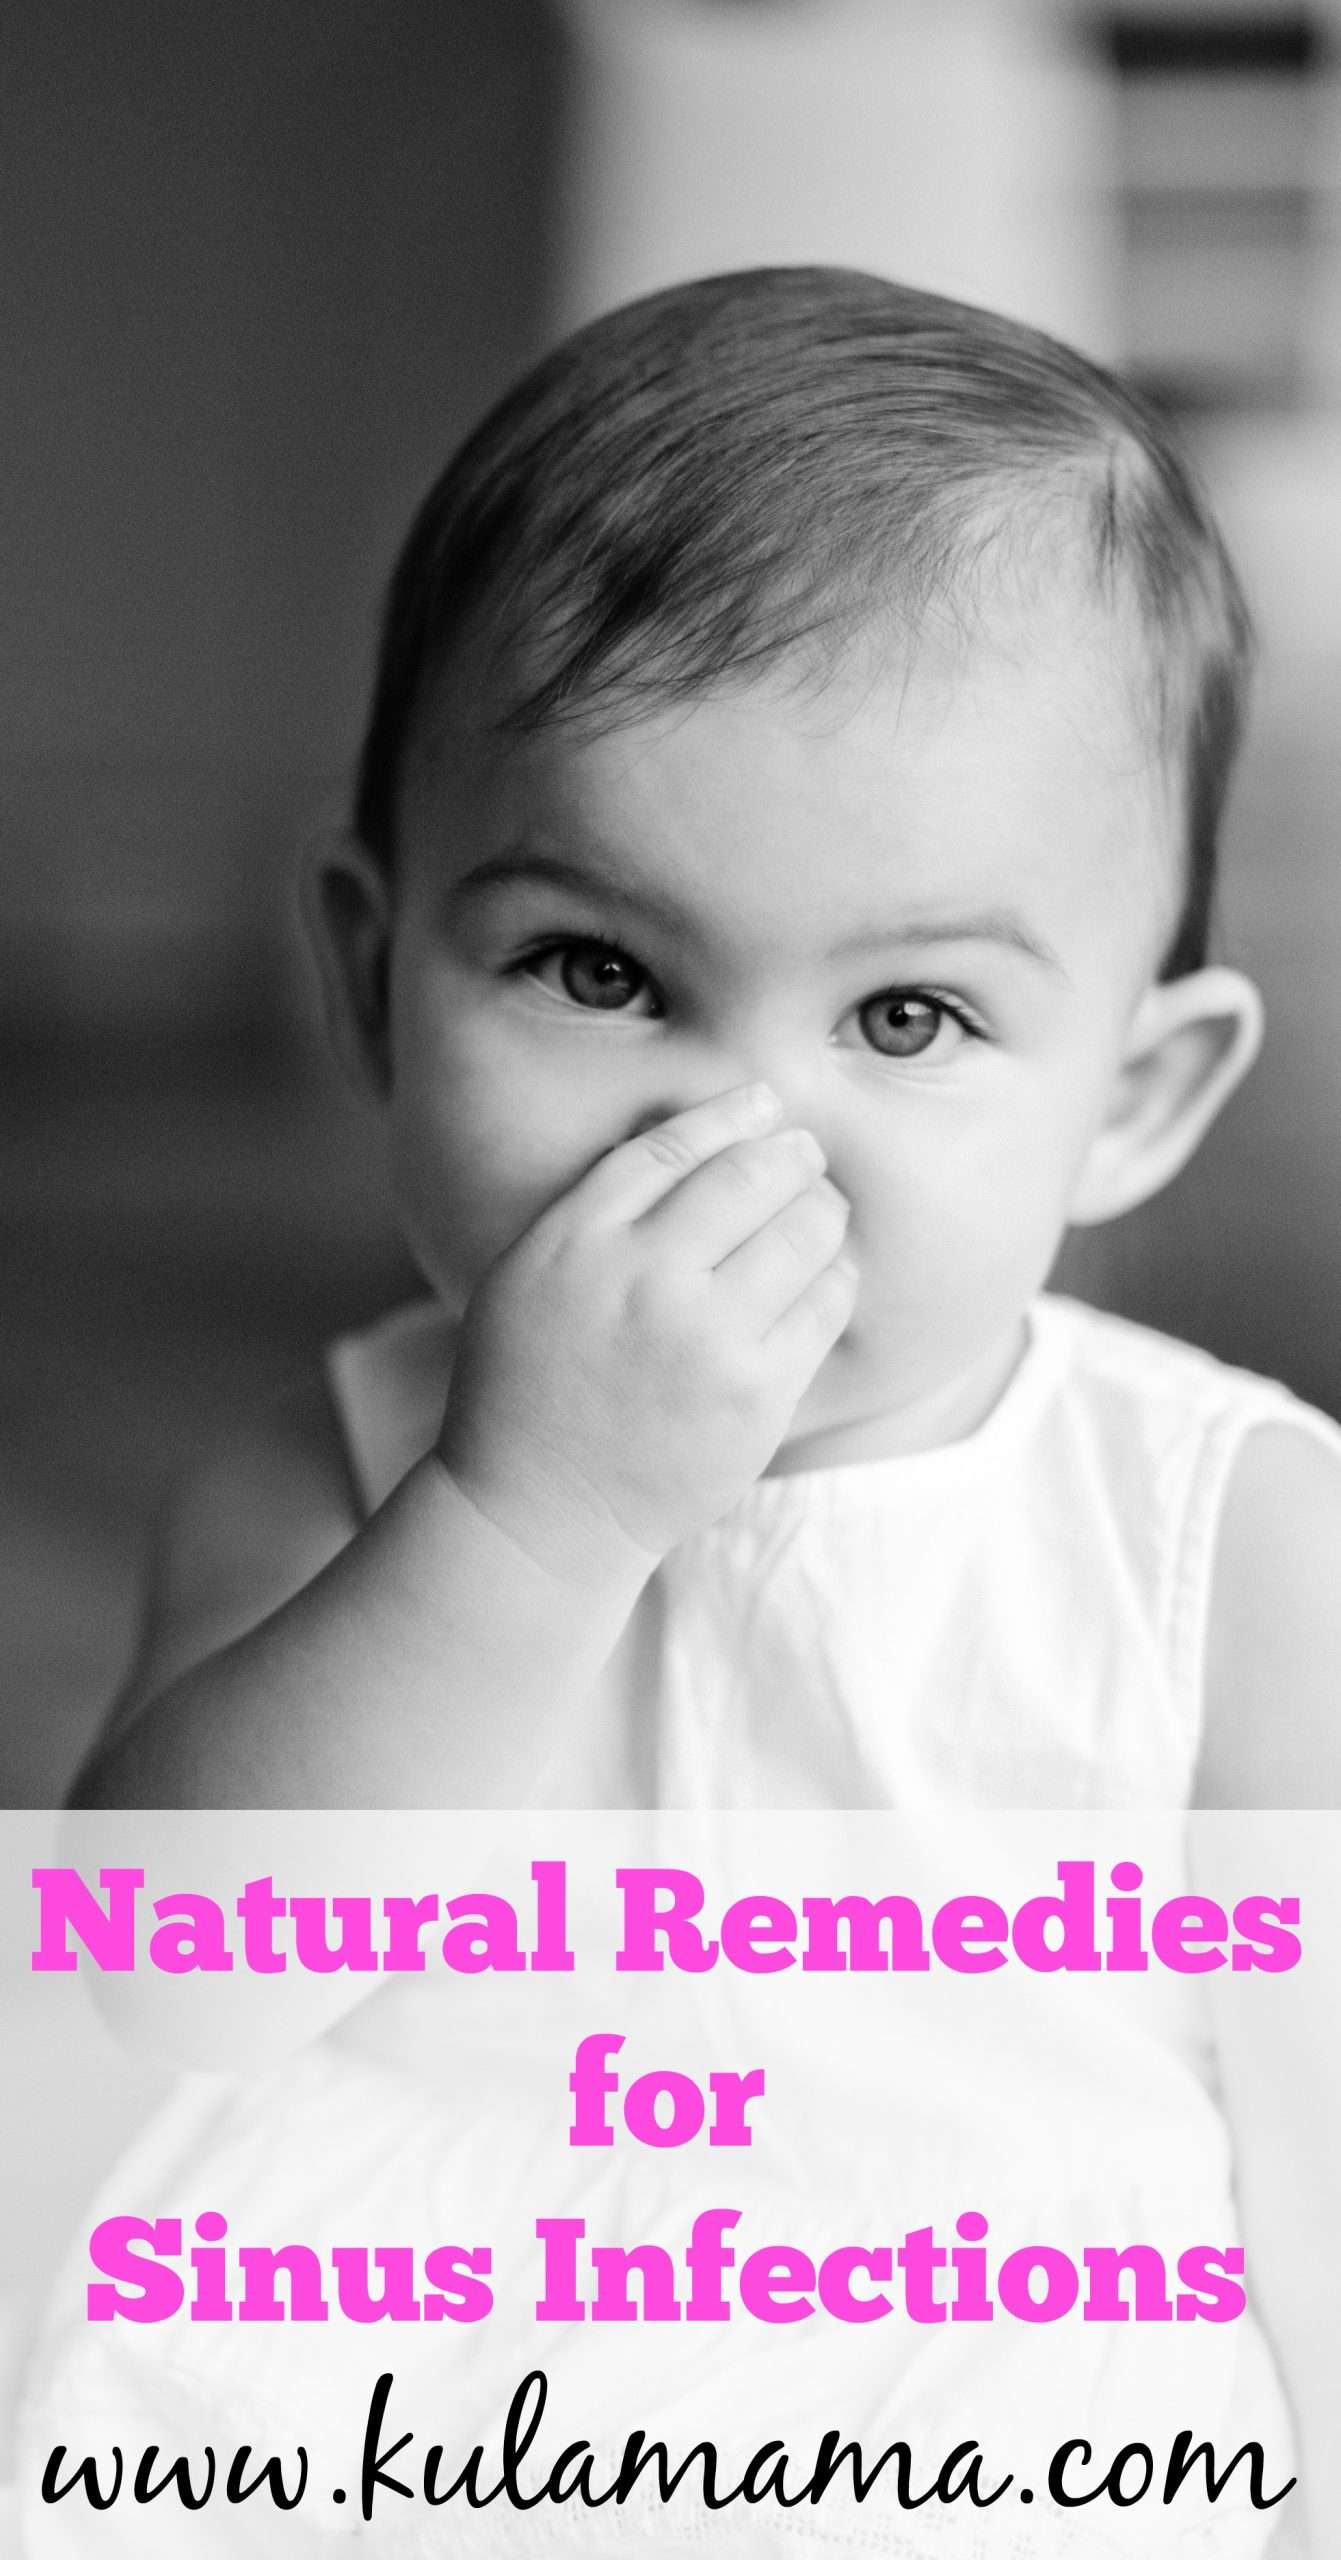 Natural Remedies for Sinus Infection